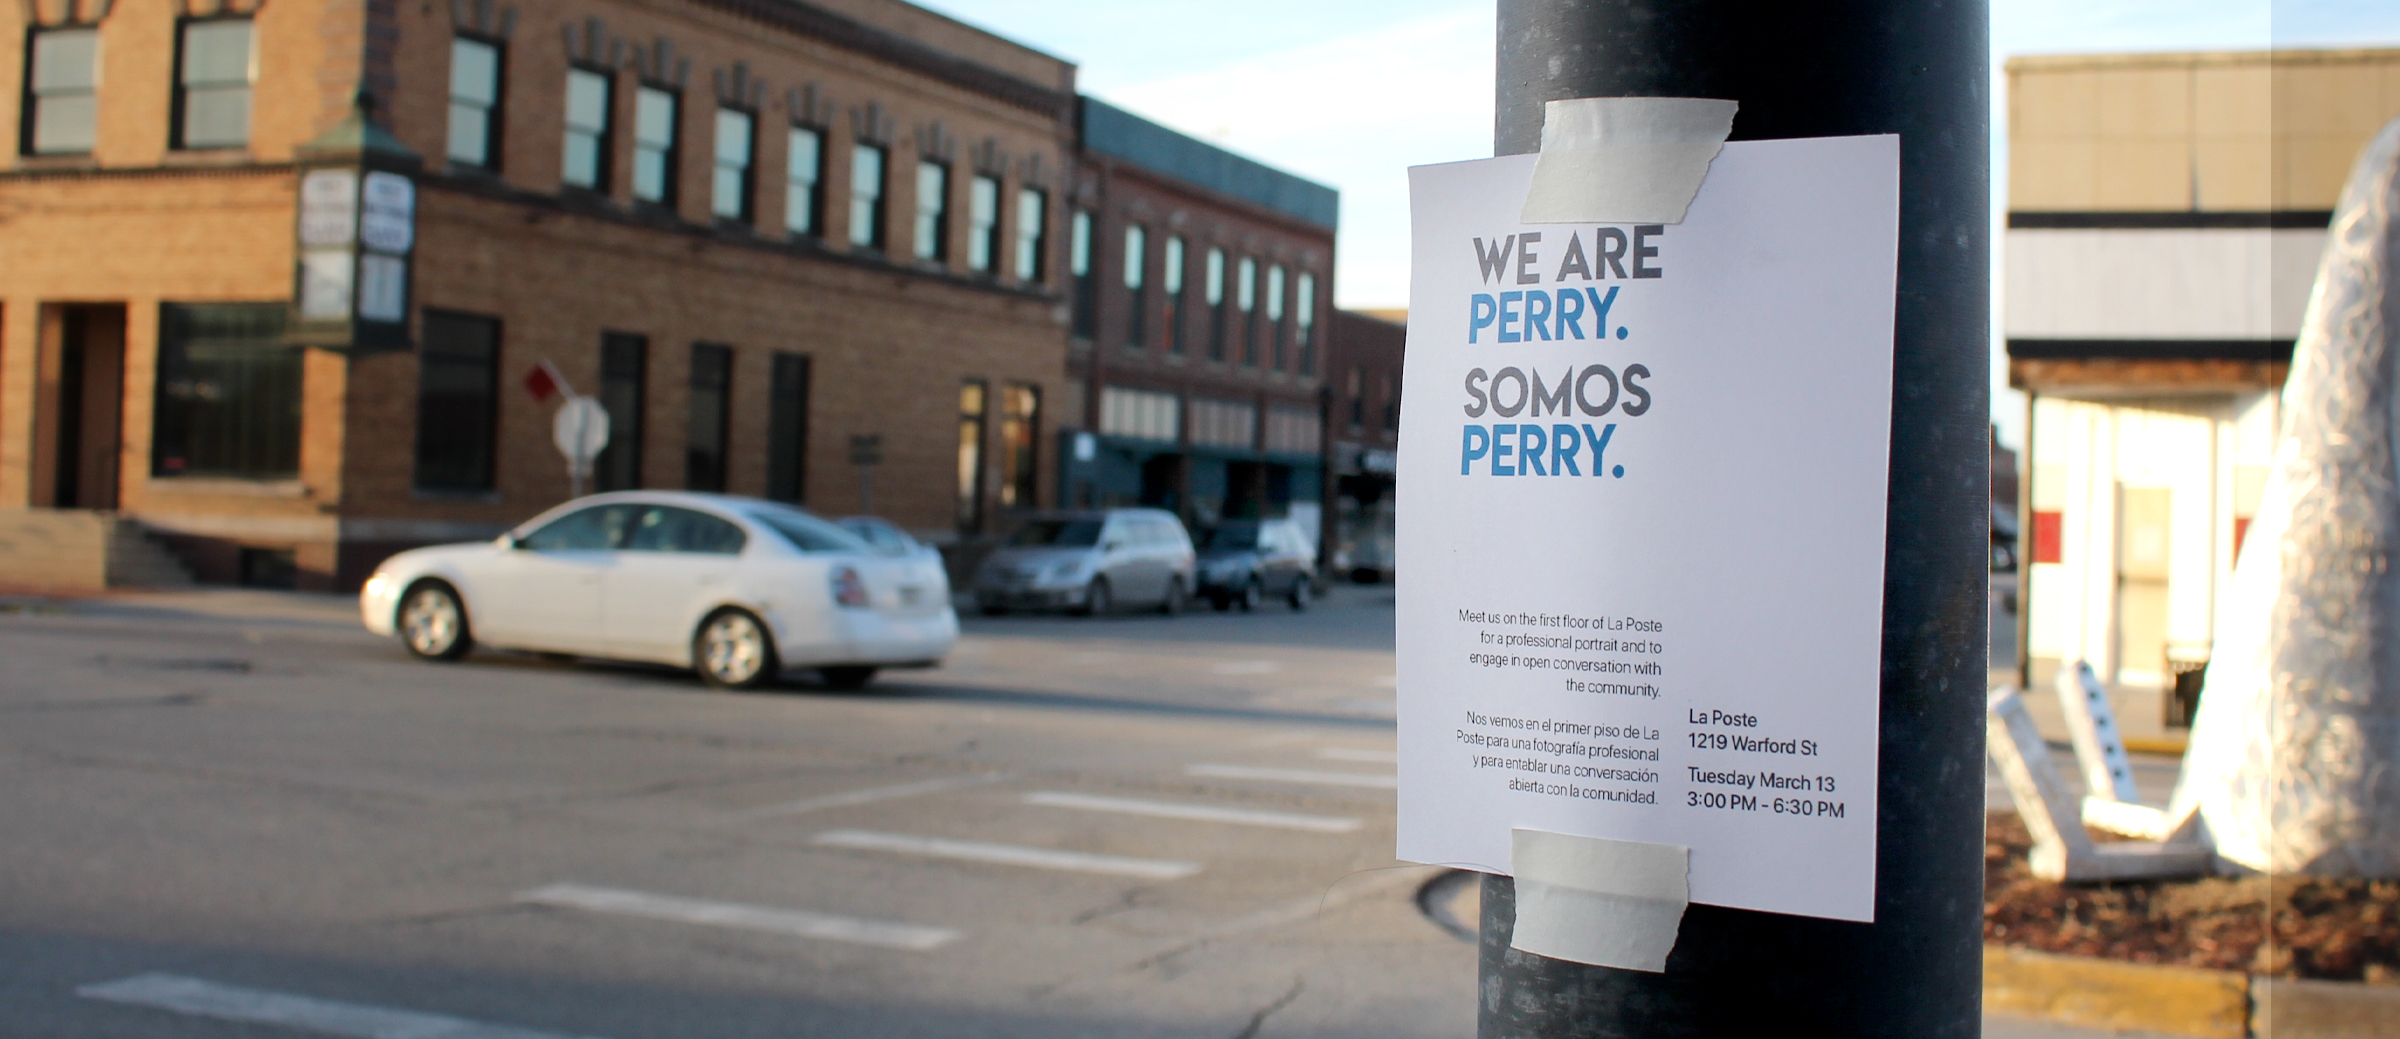 Project Perry/Proyecto Perry